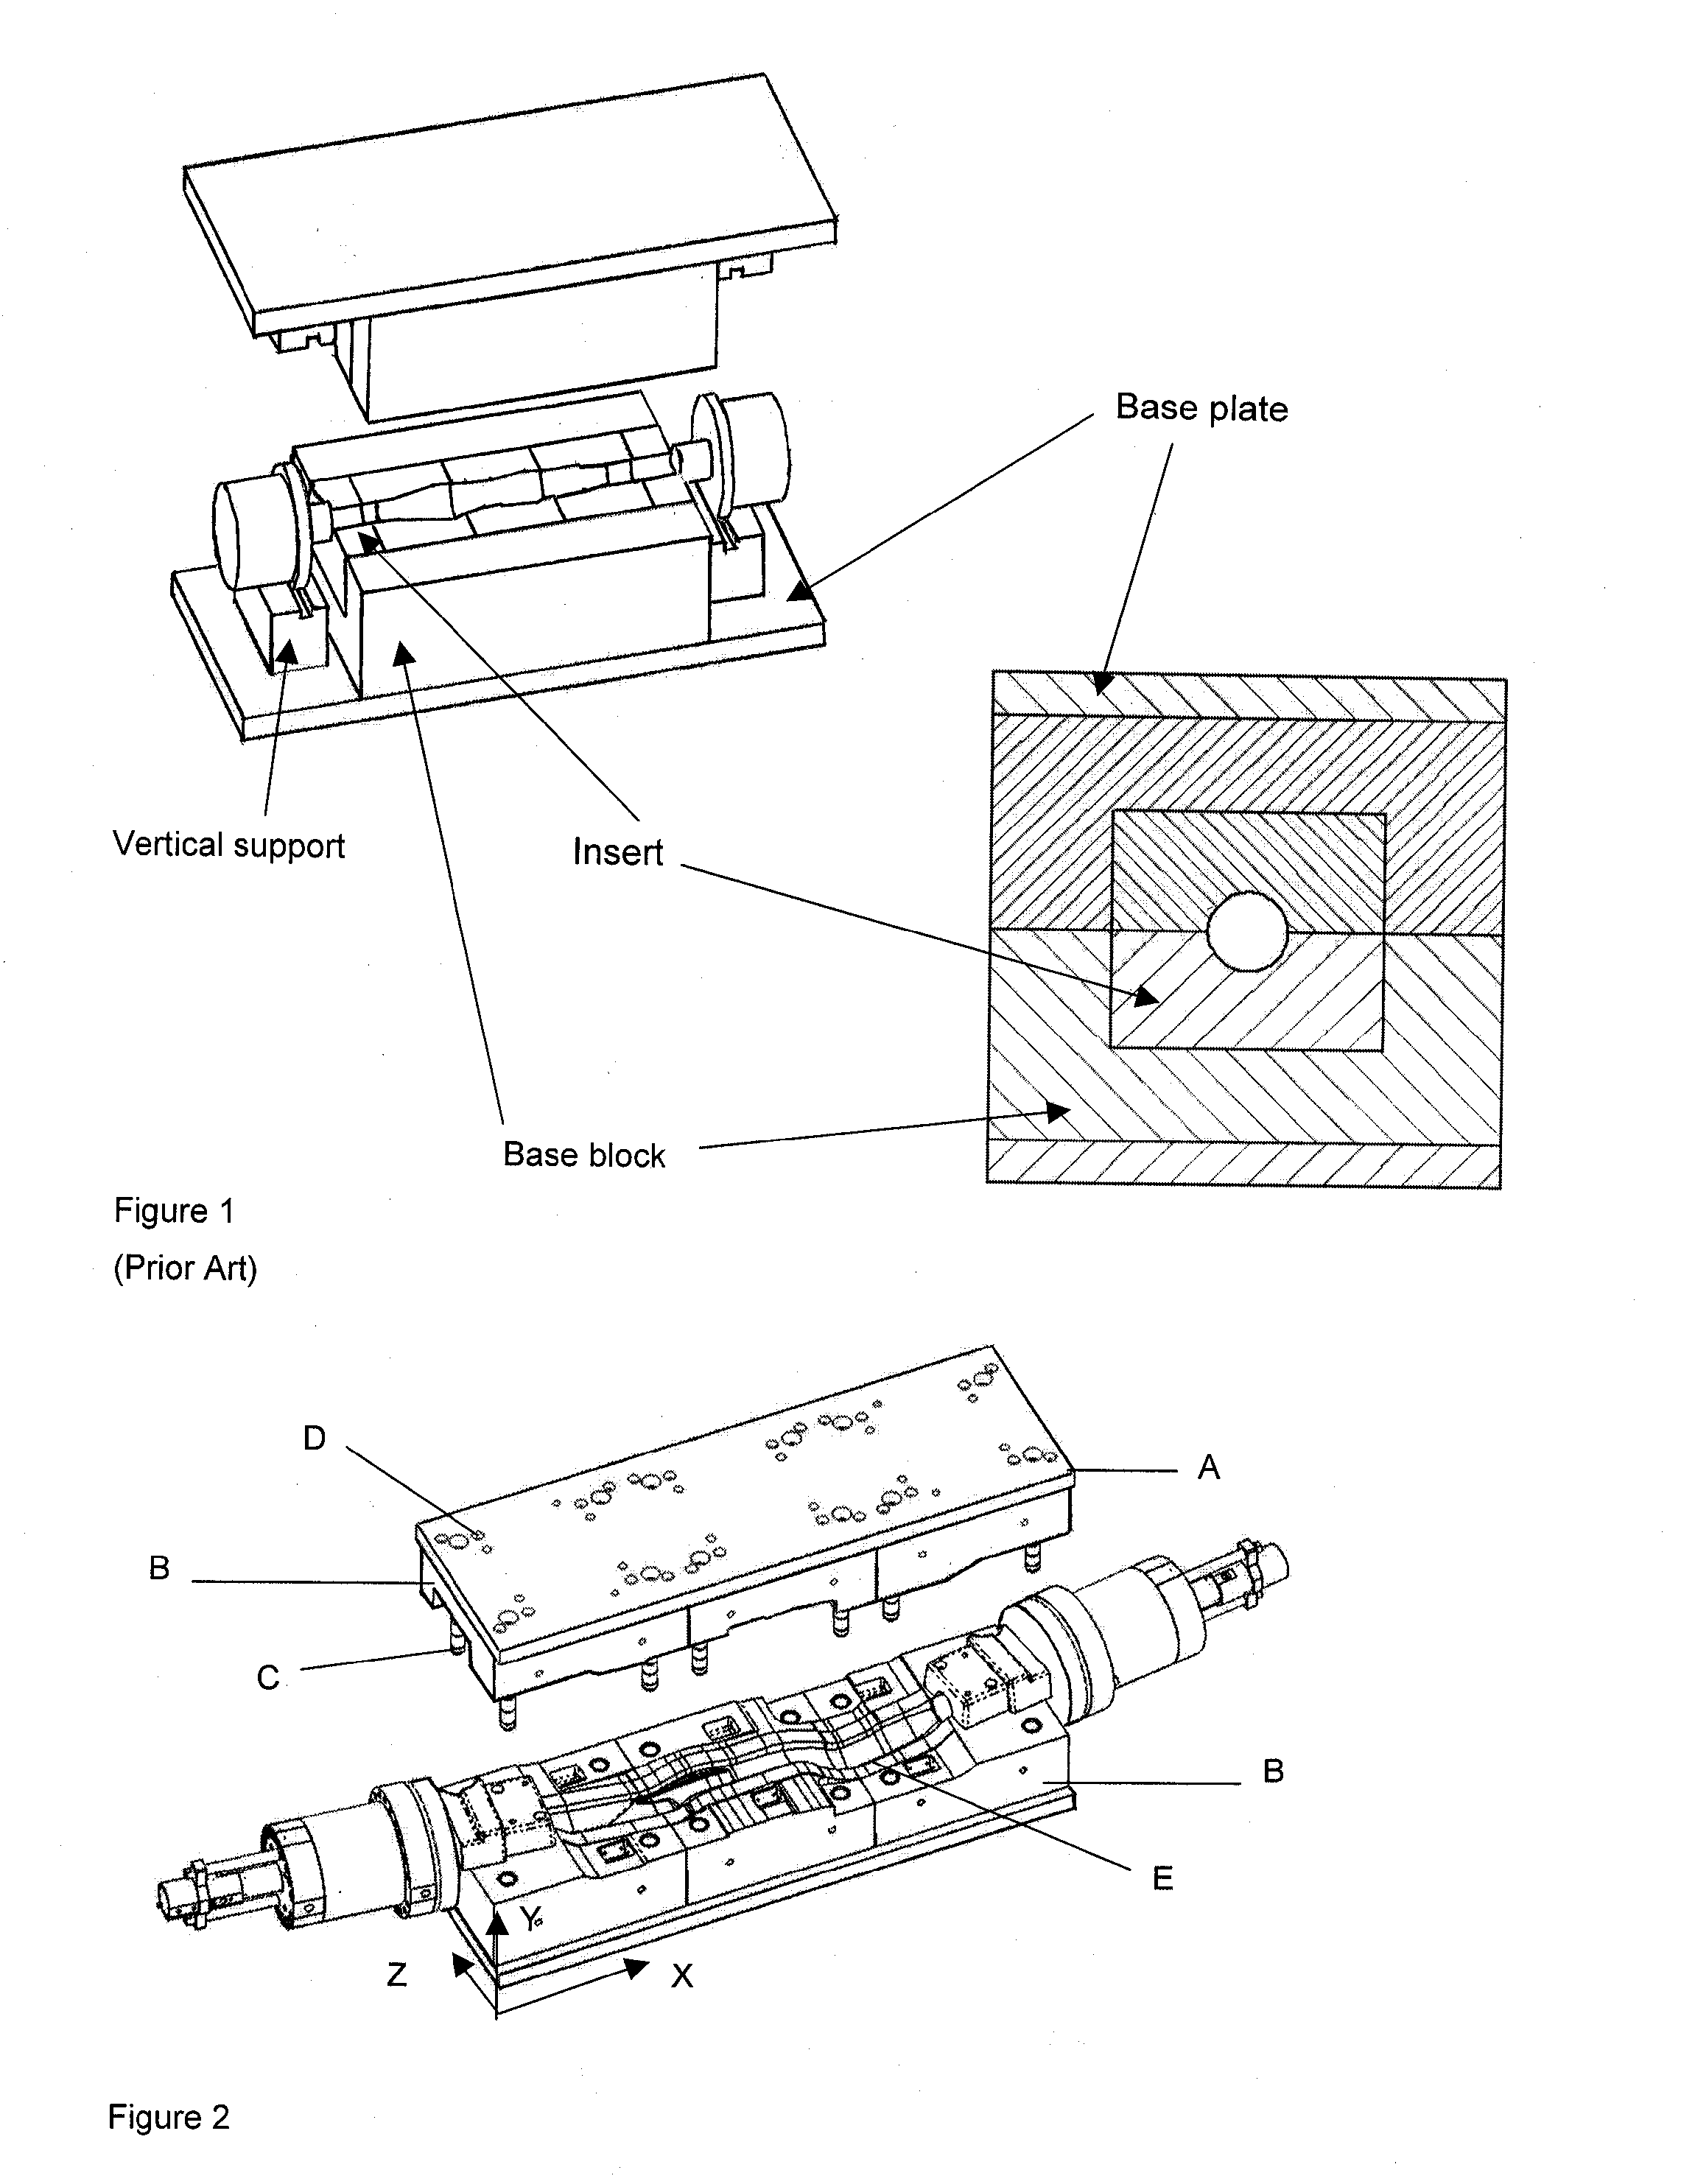 Method for forming of tubular work-pieces using a segmented tool